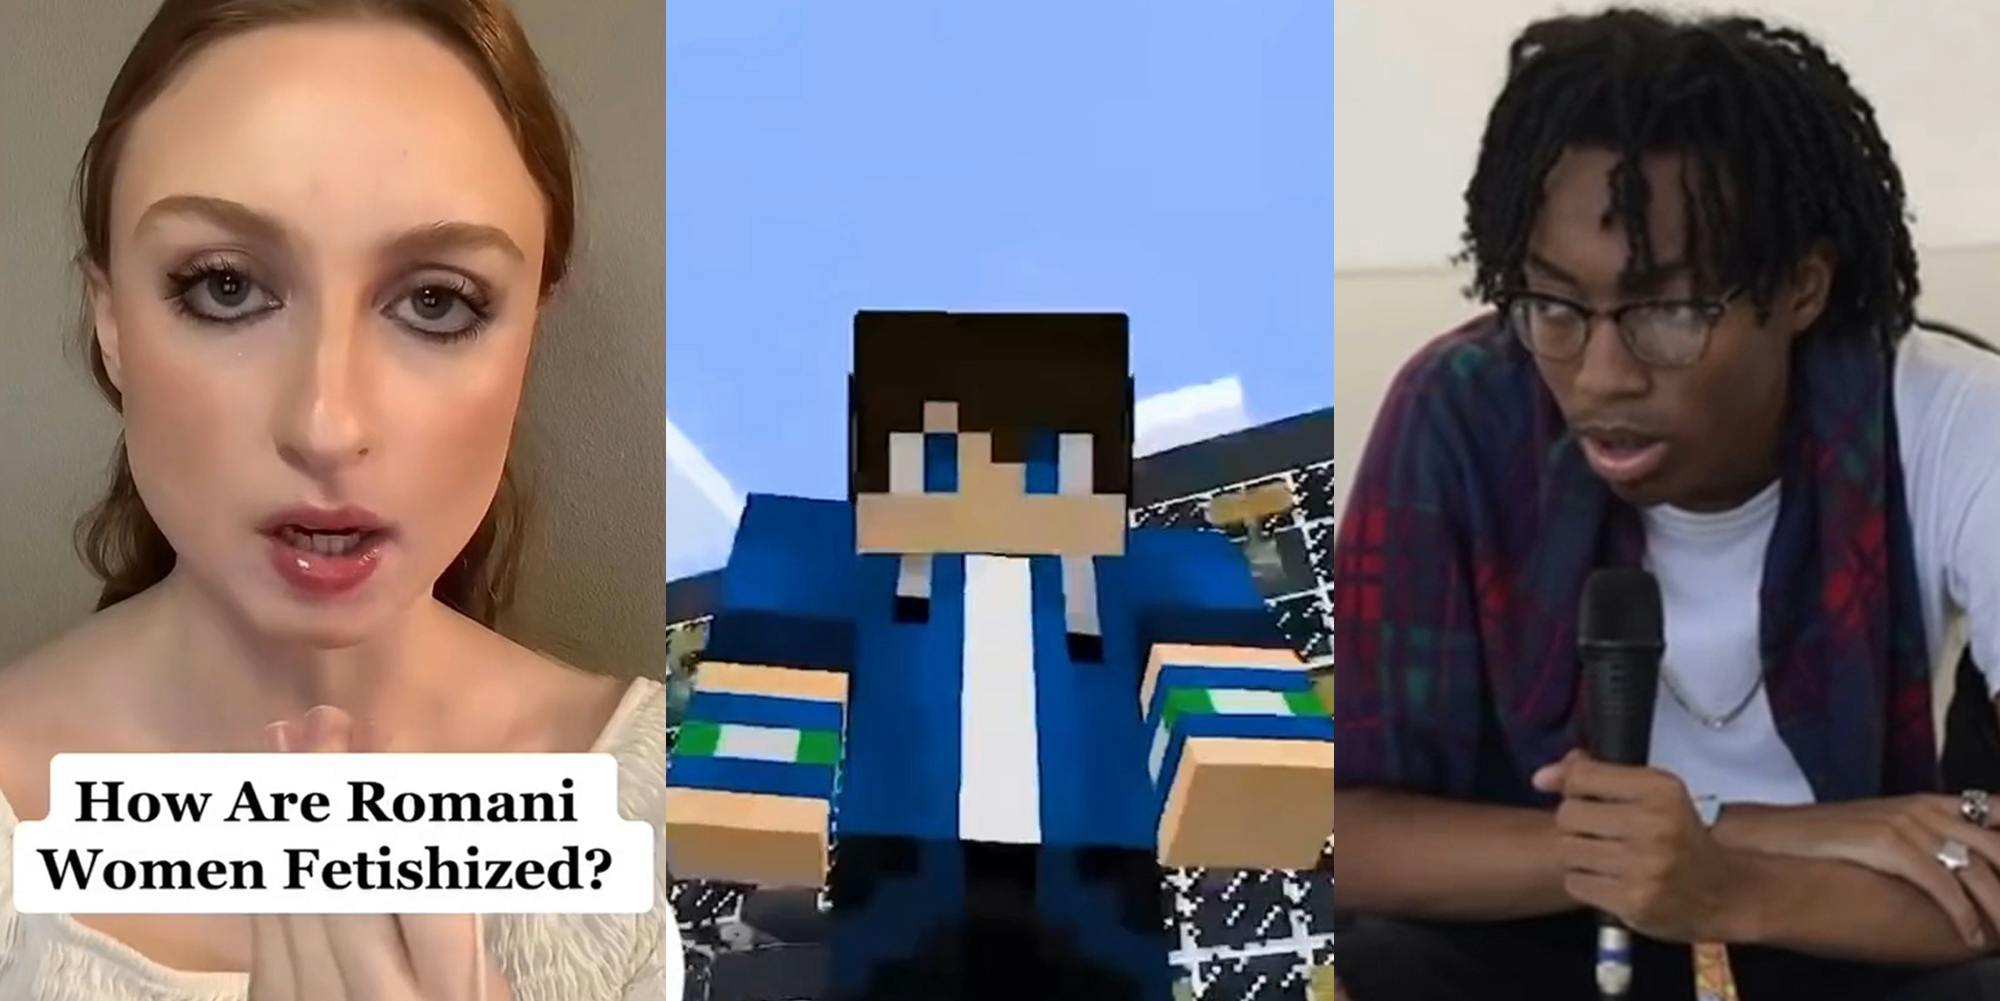 woman speaking with caption "How Are Romani Women Fetishized?" TikTok (l) Minecraft player with sky (c) man speaking into microphone TikTok